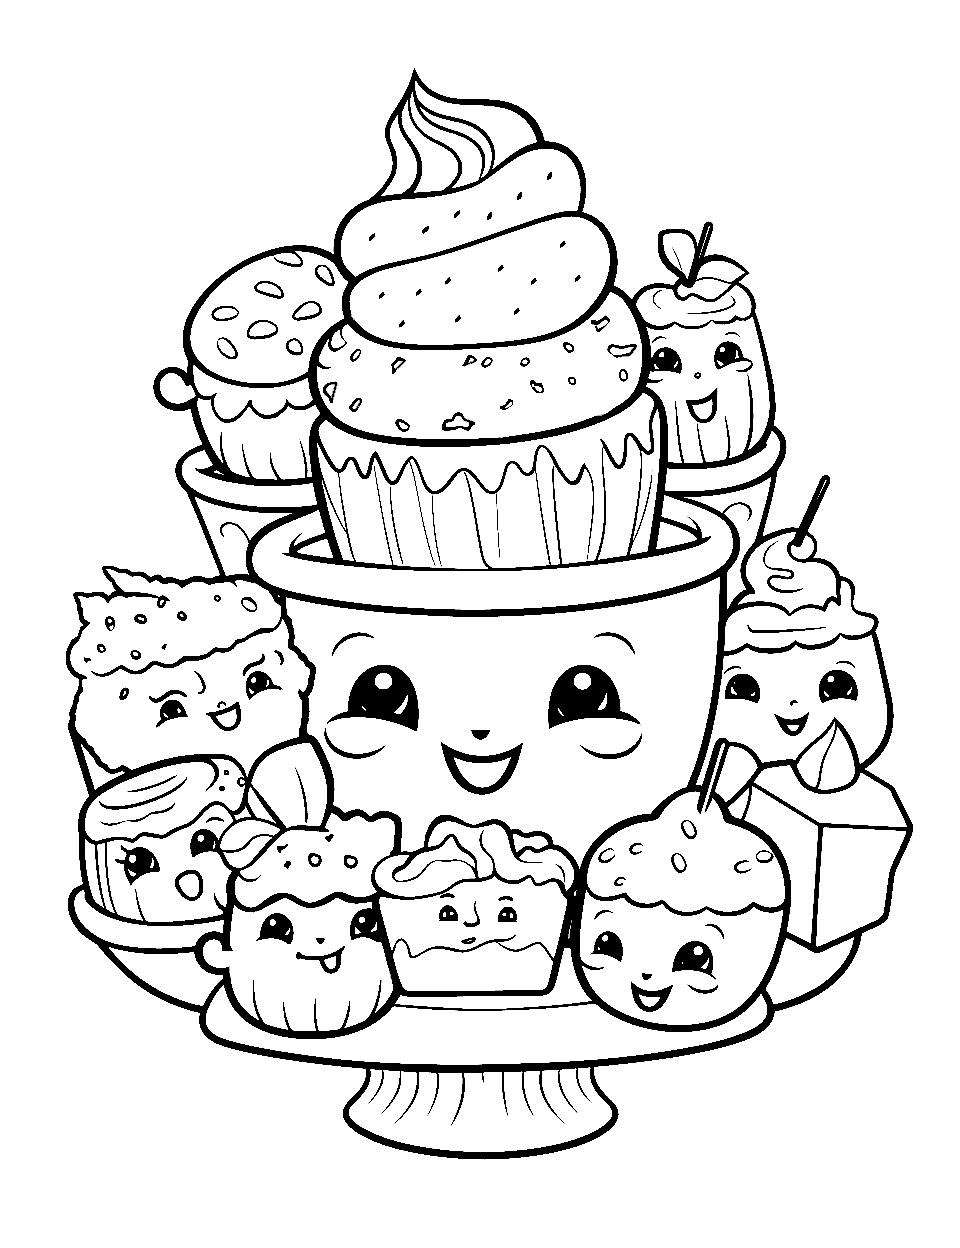 Dessert Delight Party Coloring Page - A table filled with various desserts, with joyful Shopkin faces.